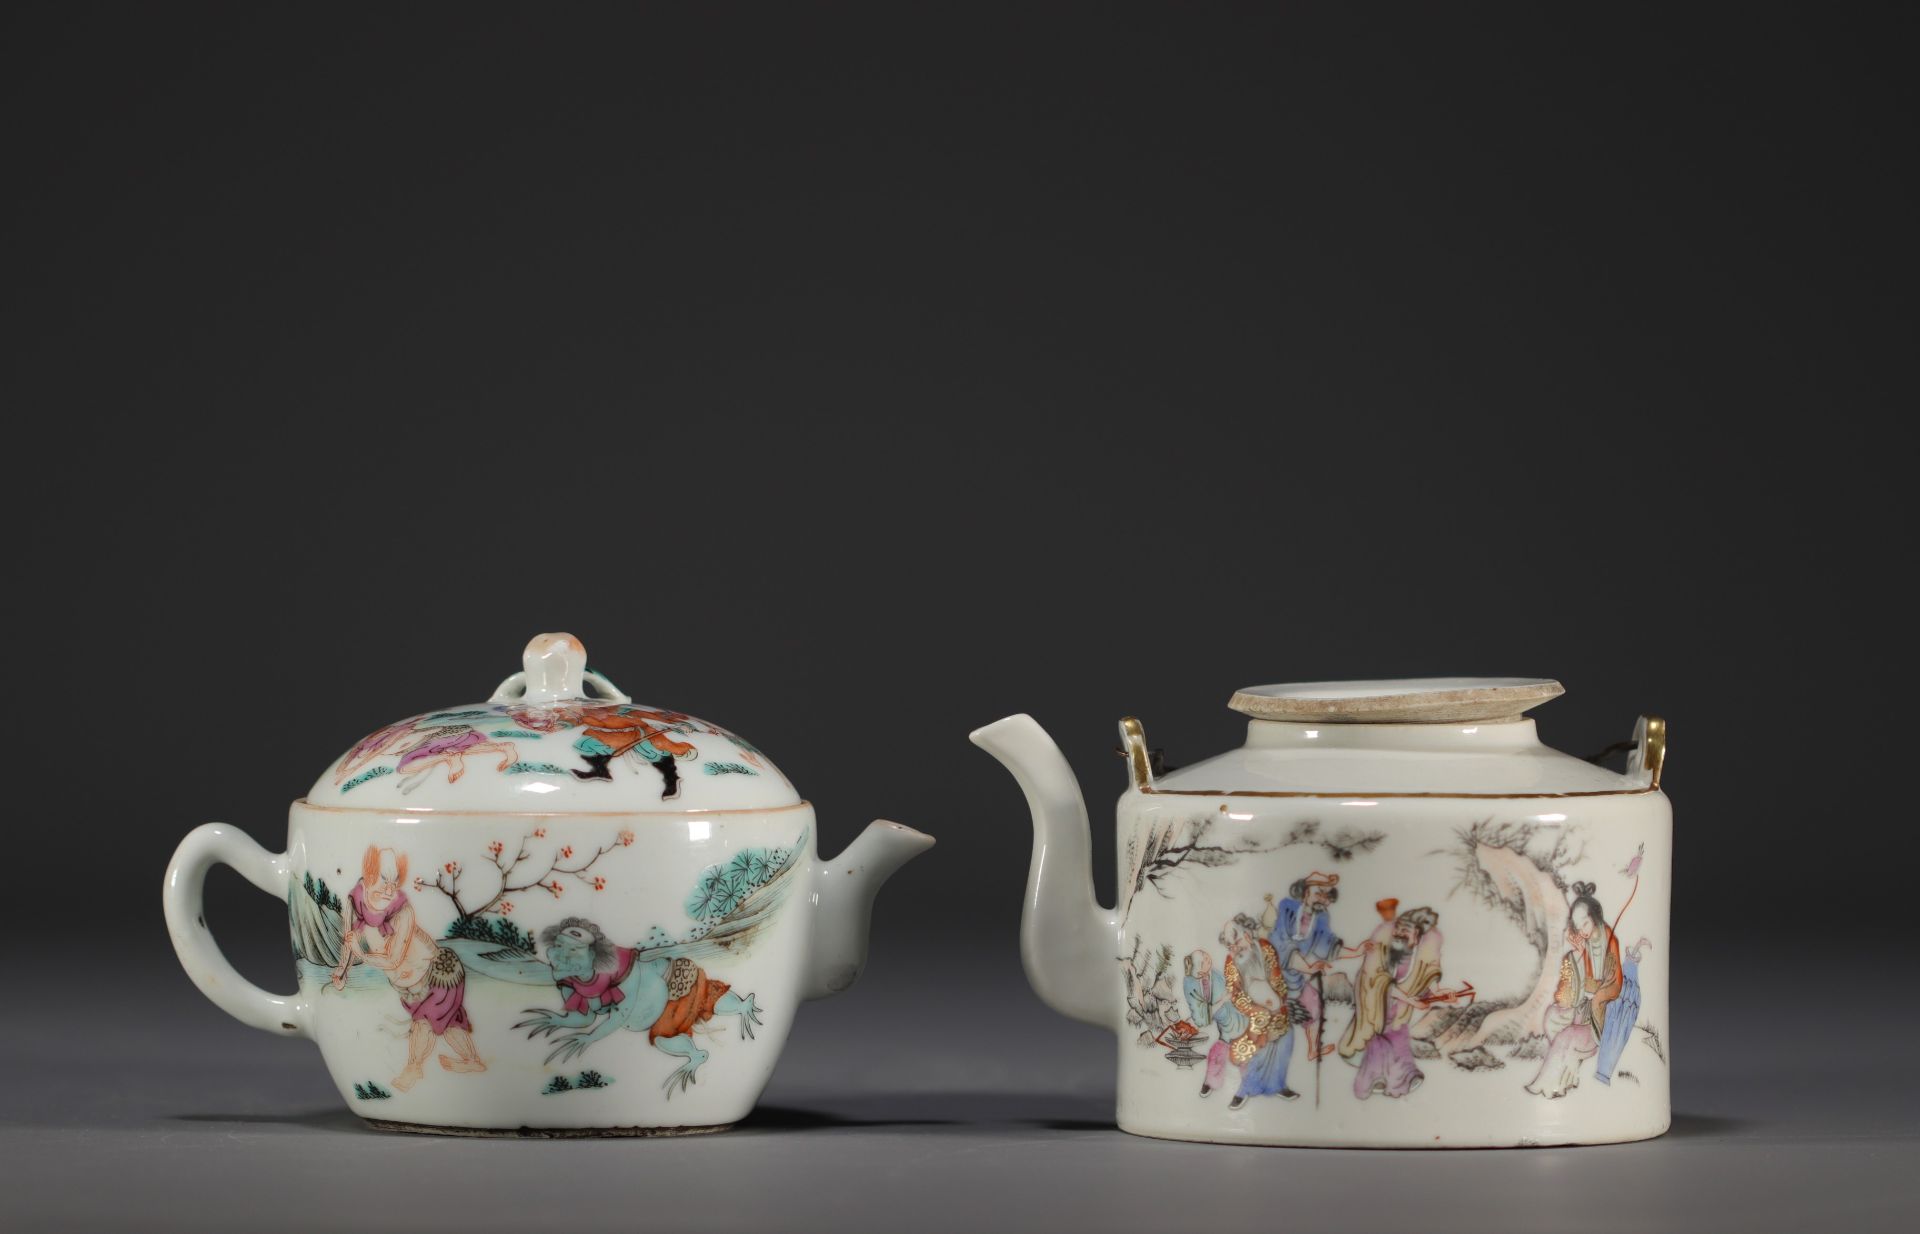 China - Set of two porcelain teapots decorated with warriors and dignitaries. - Image 3 of 4